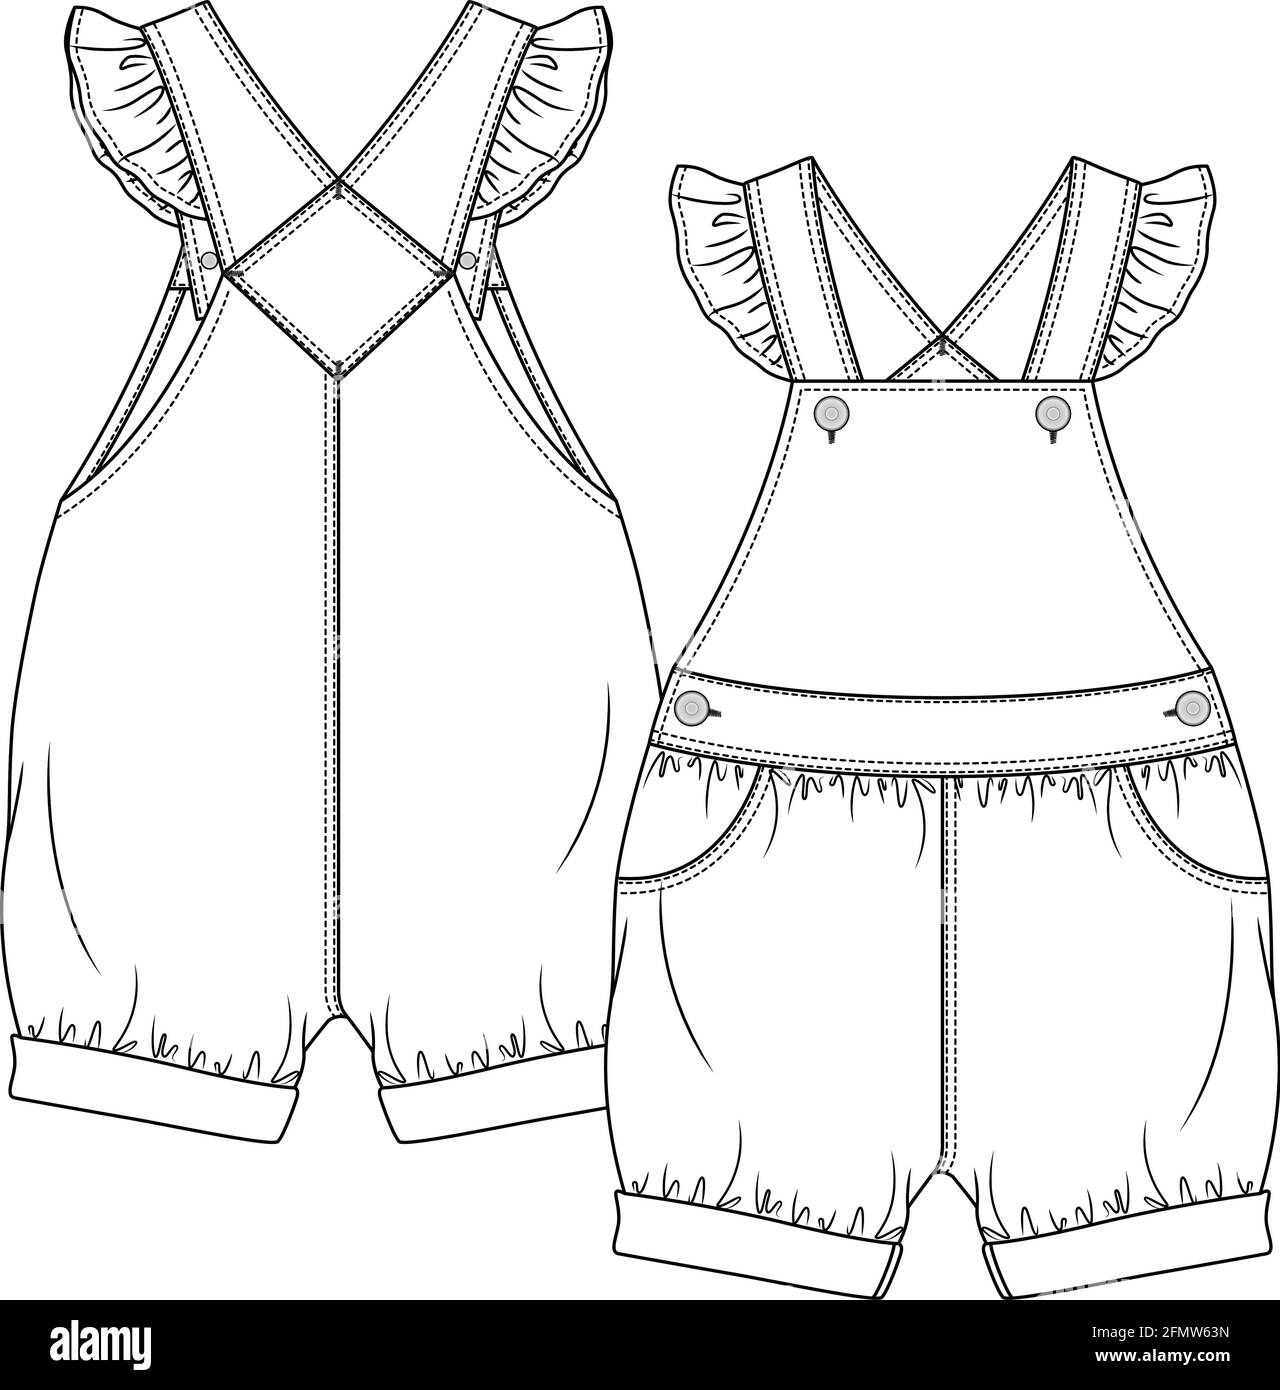 Baby Girls dungaree fashion flat sketch template. Kids Jumpsuit Overall Technical Fashion Illustration. Frill detail at straps Stock Vector